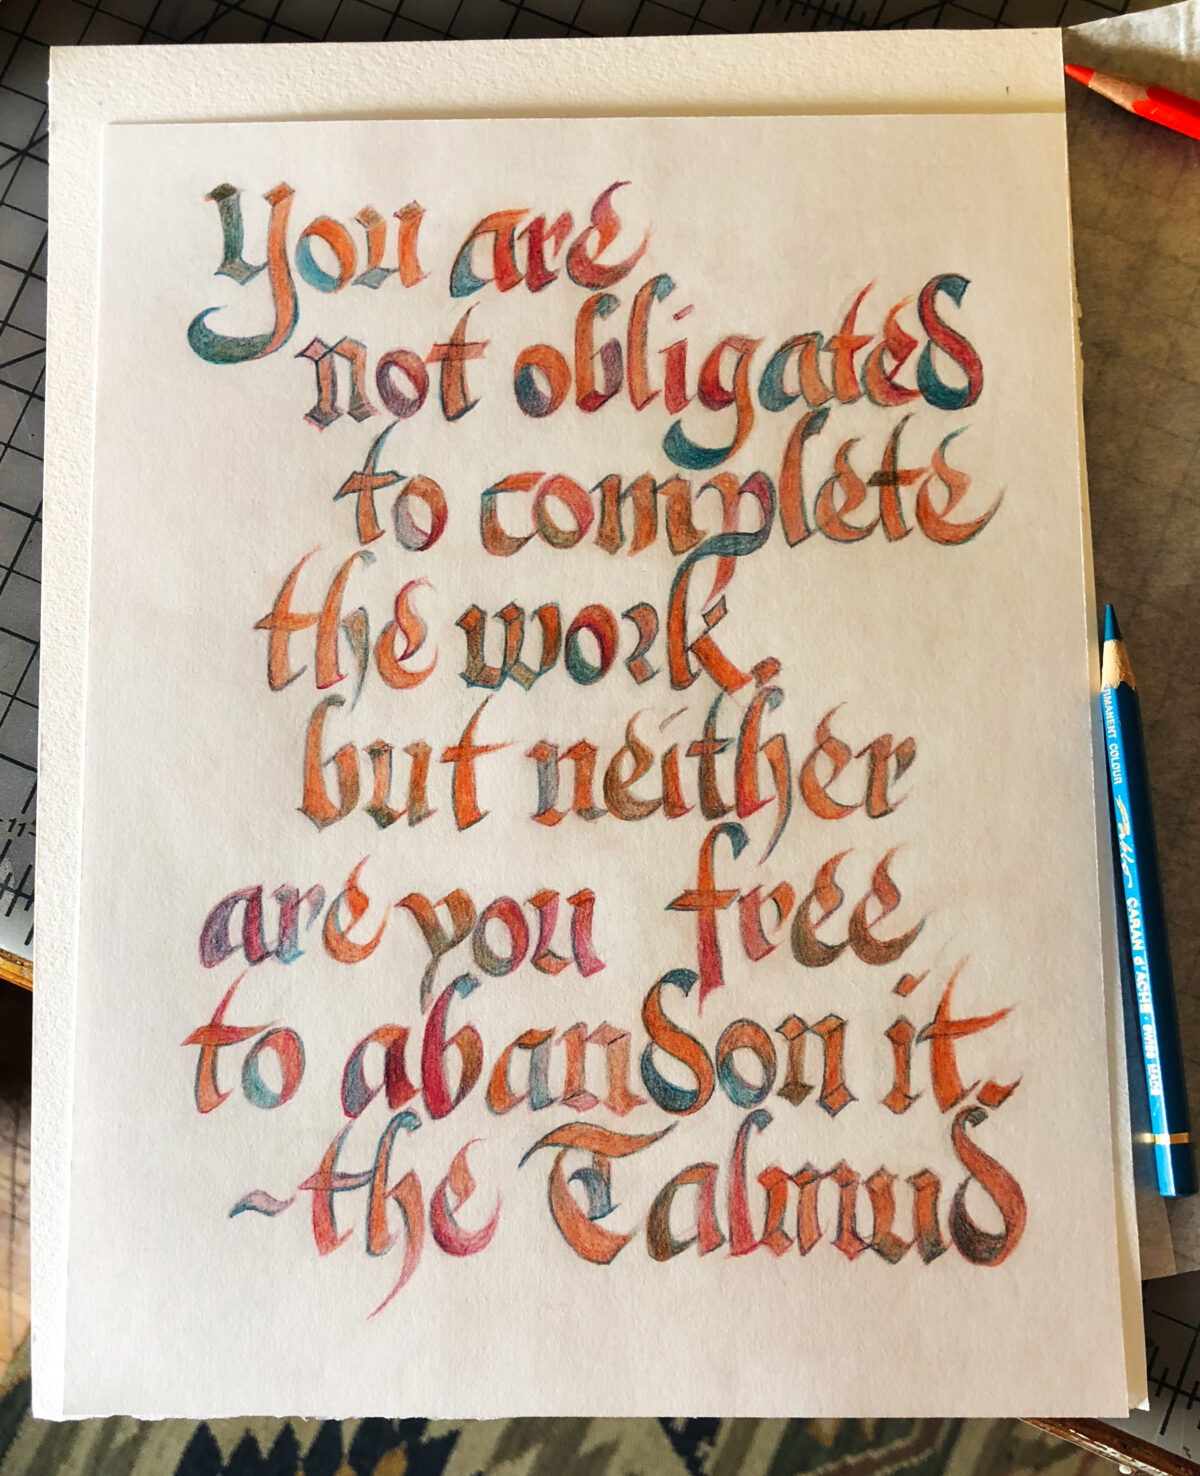 Calligraphy: "you are not obligated to complete the work, but neither are you free to abandon it. —the Talmud"